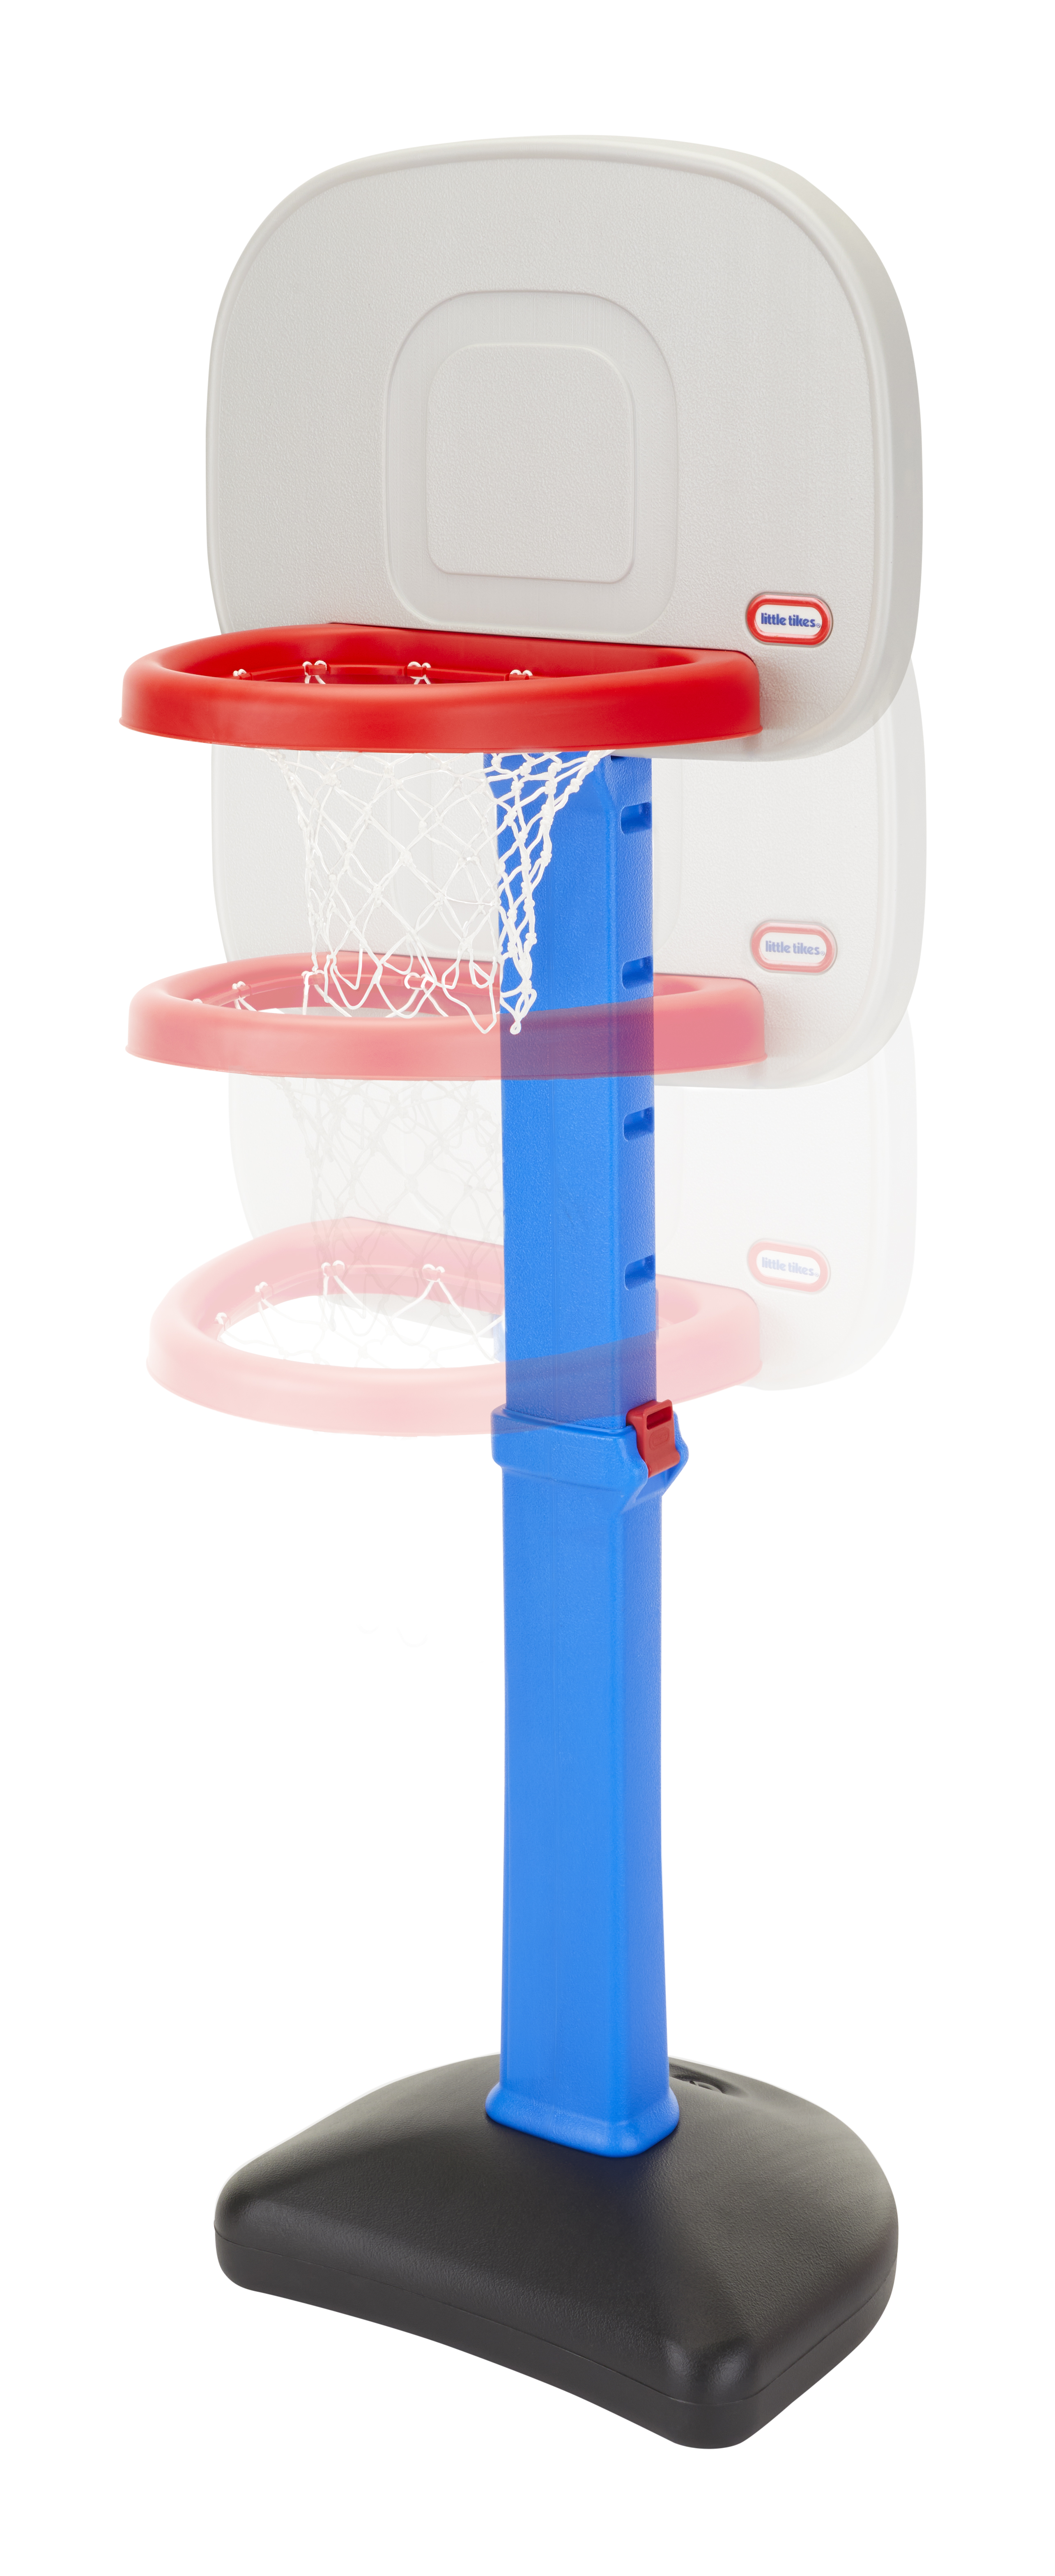 Little Tikes TotSports Easy Score Toy Basketball Hoop with Ball, Height Adjustable, Indoor Outdoor Backyard Toy Sports Play Set For Kids Girls Boys Ages 18 months to 5 Year Old, Blue - image 5 of 6